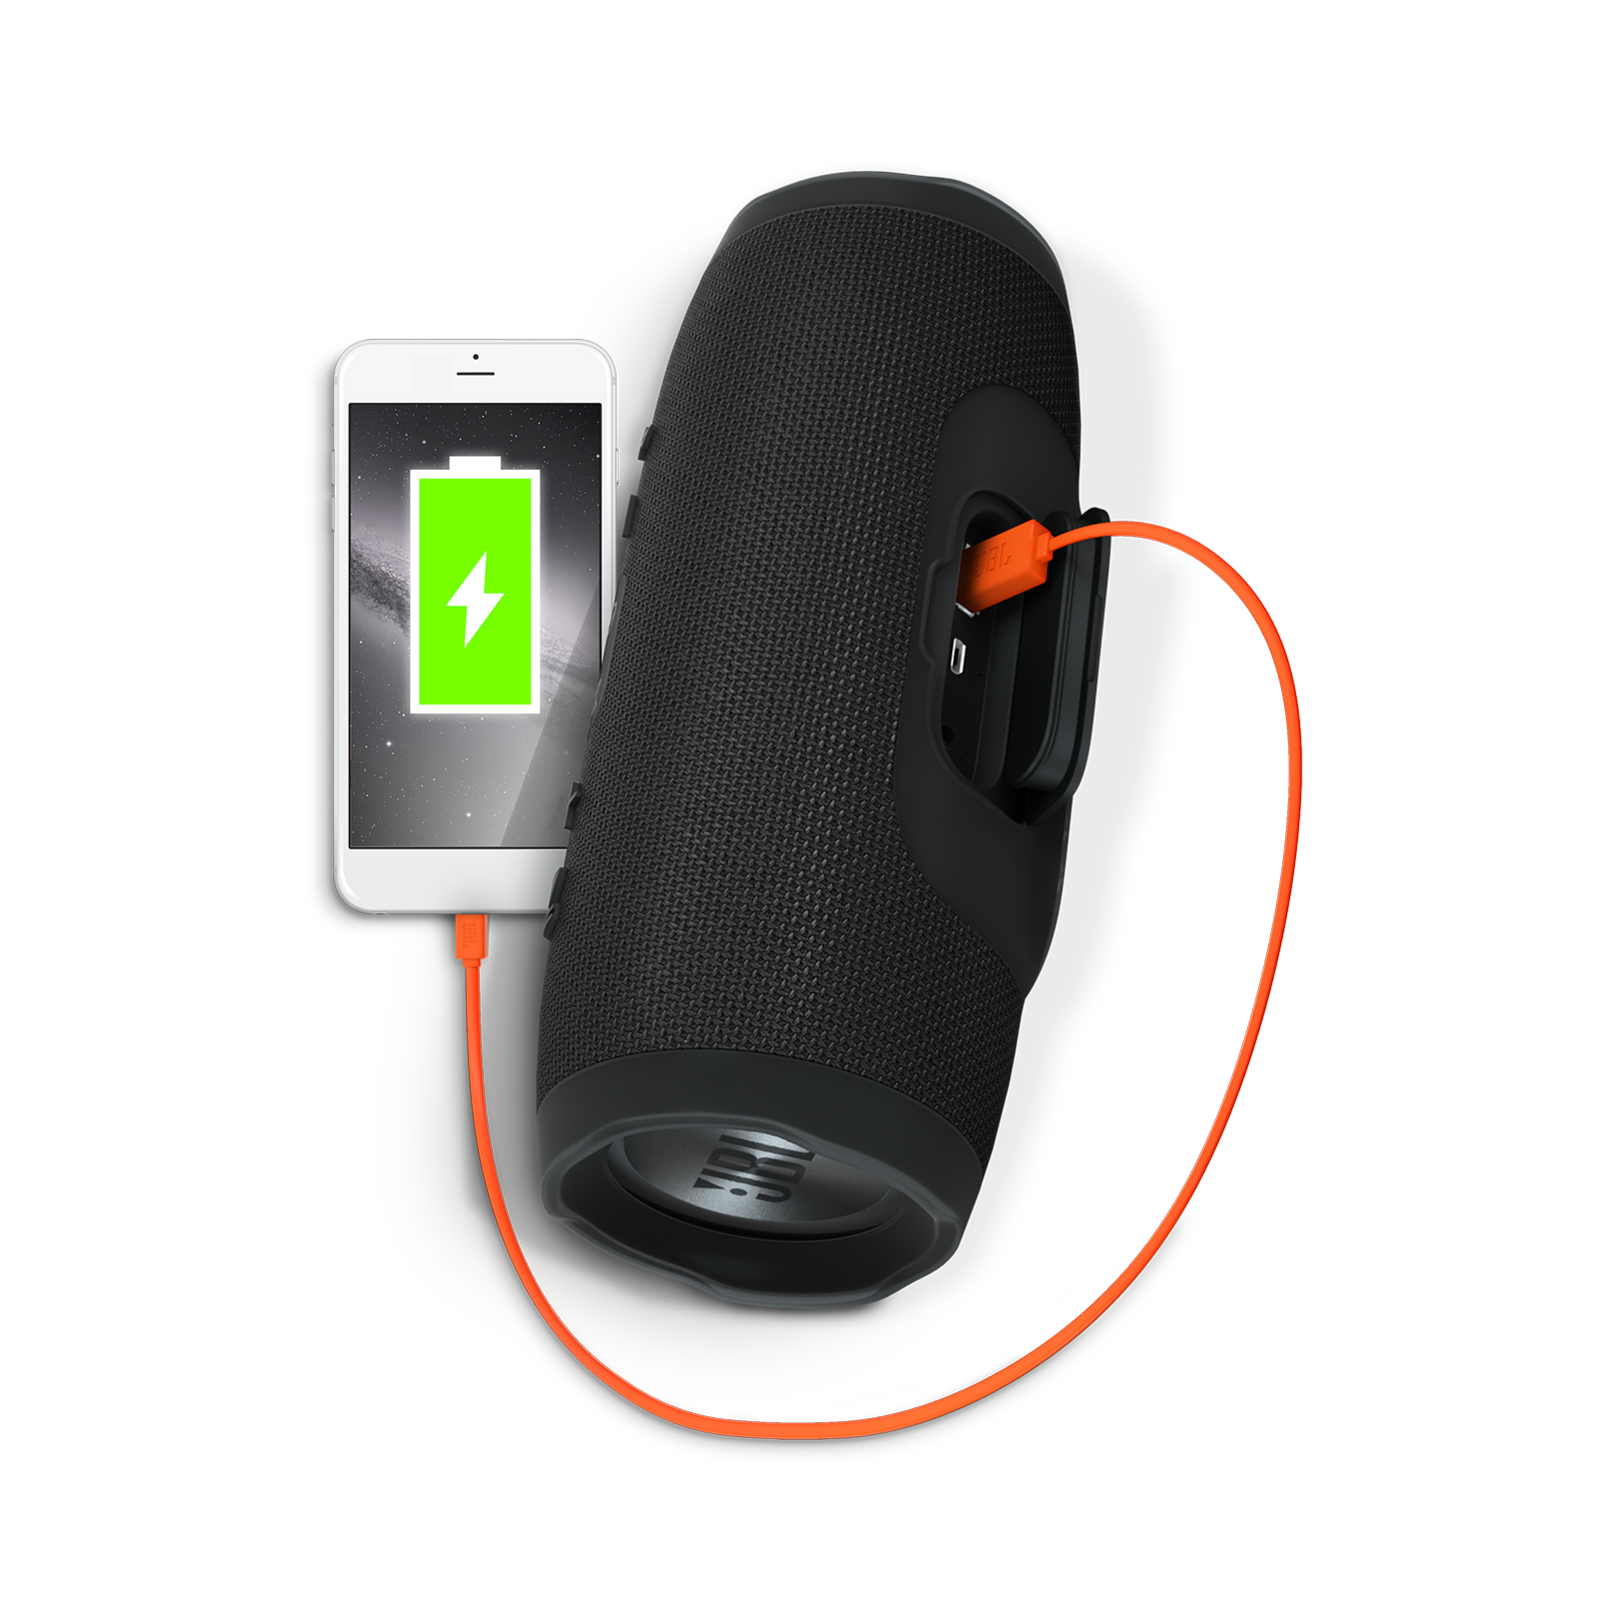 JBL Charge 3 - Black - Full-featured waterproof portable speaker with high-capacity battery to charge your devices - Detailshot 1